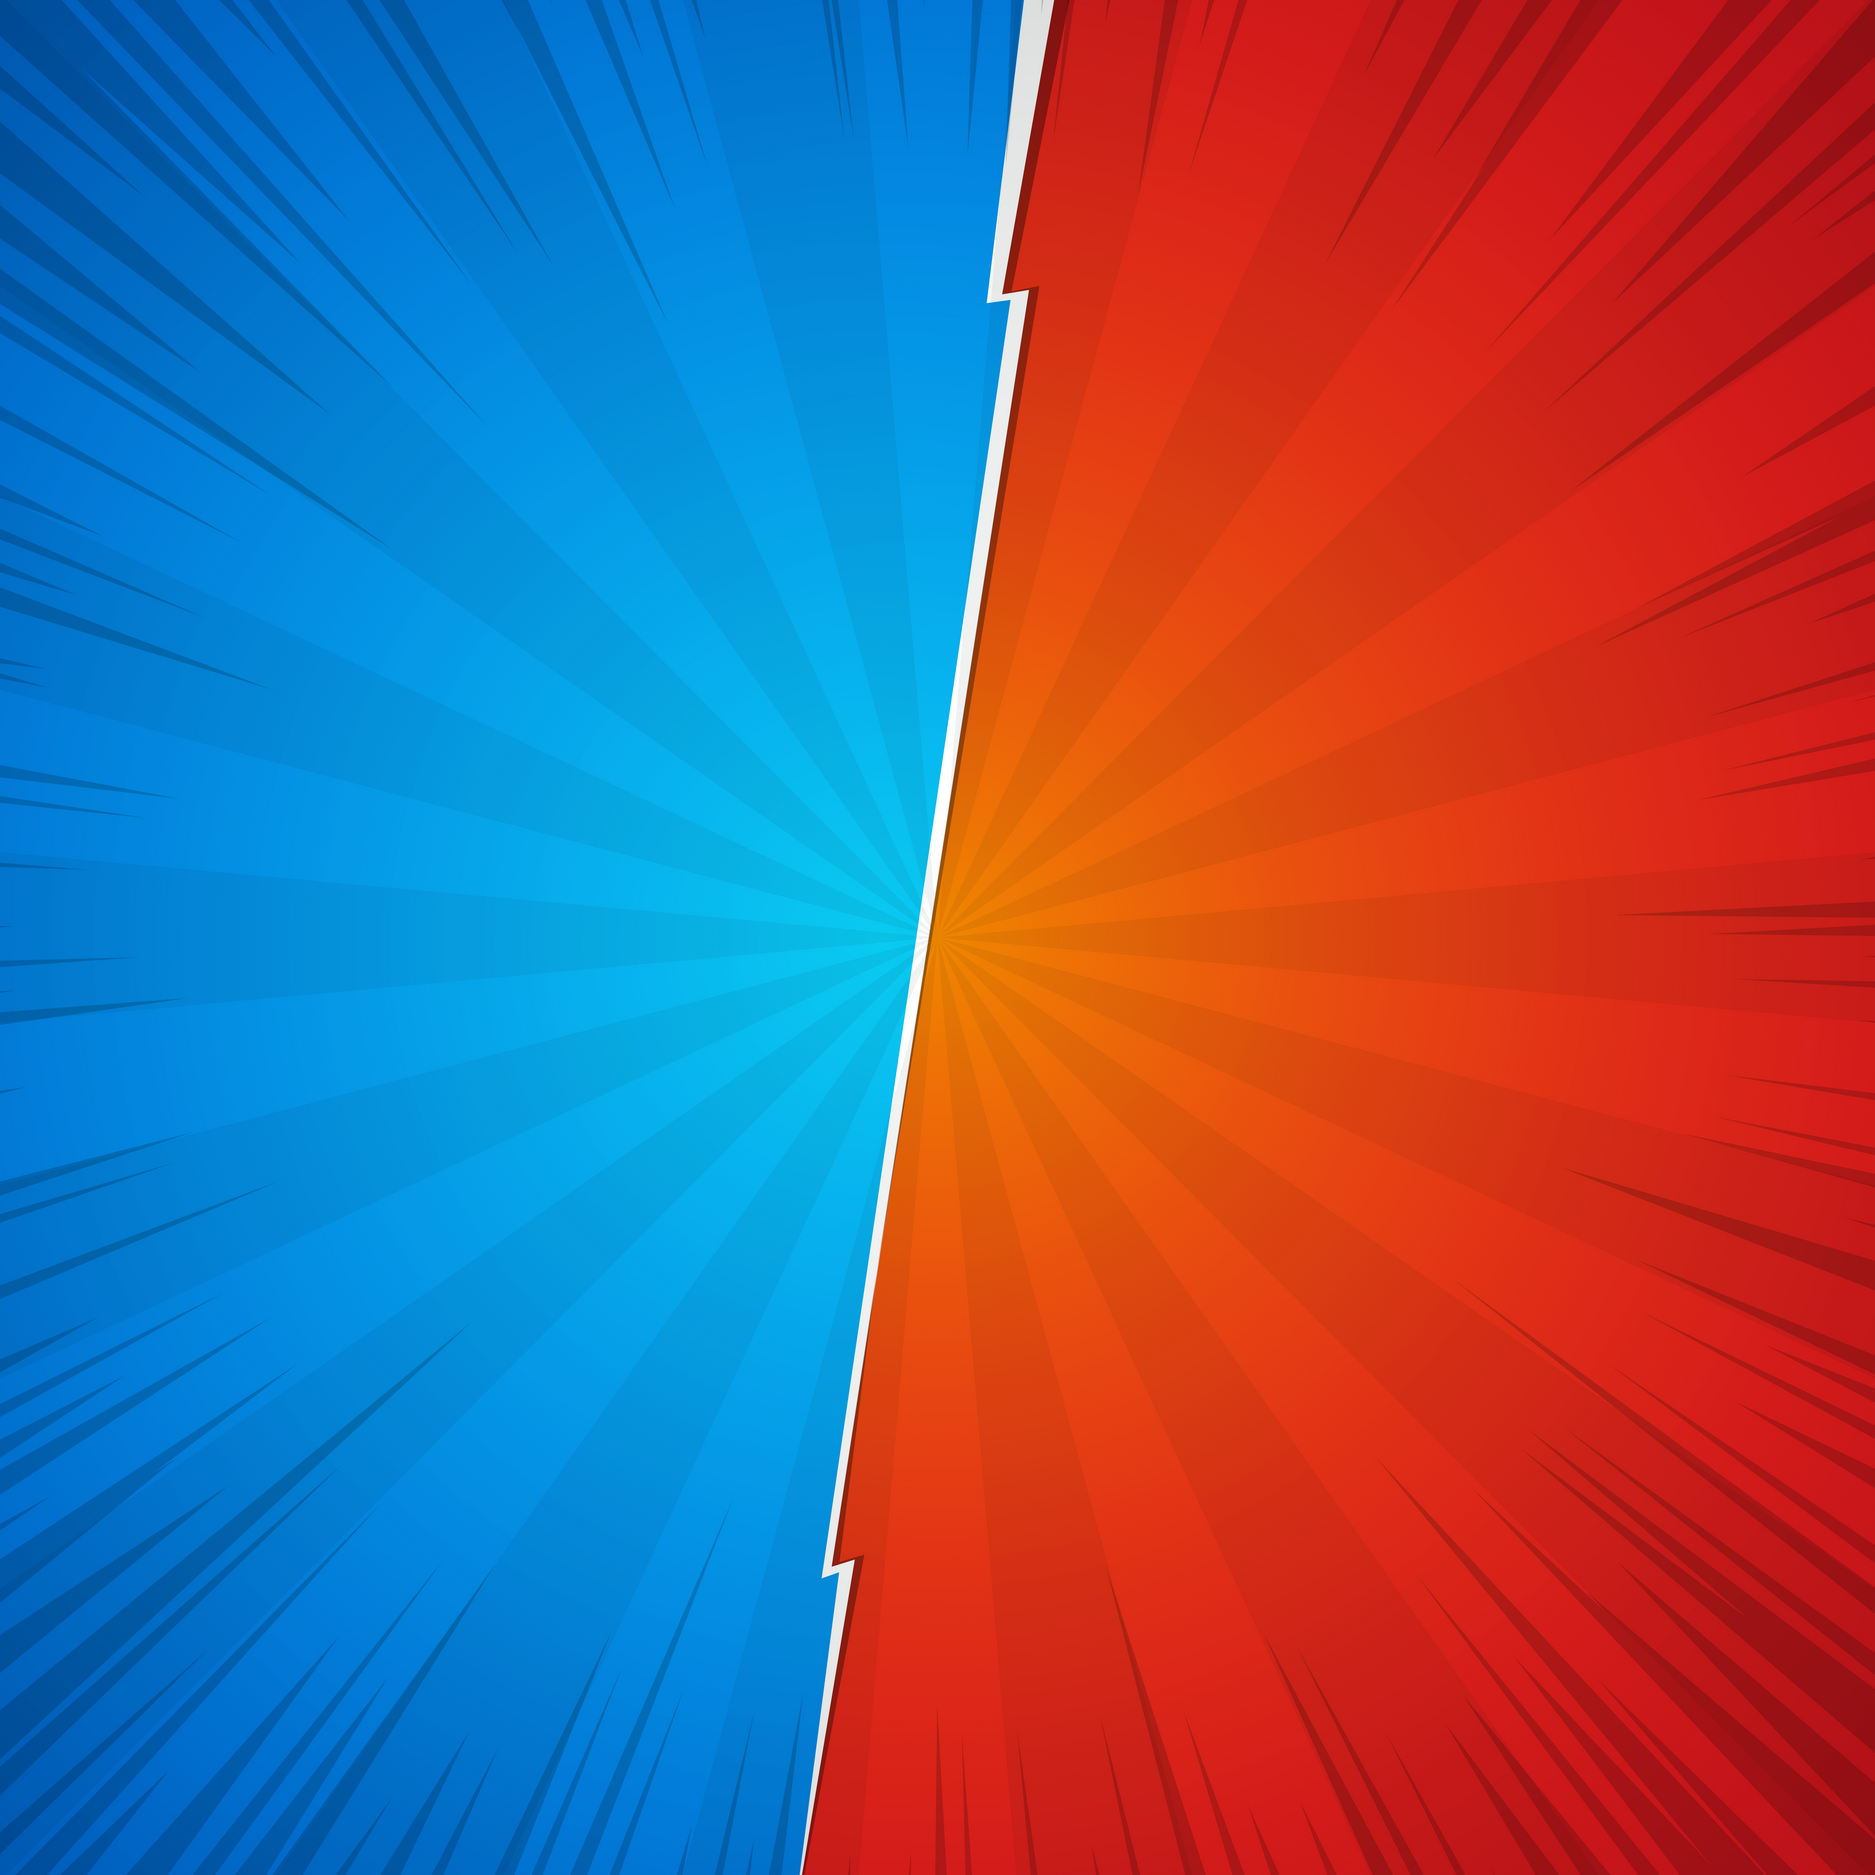 VS, Versus, Blue and red Background